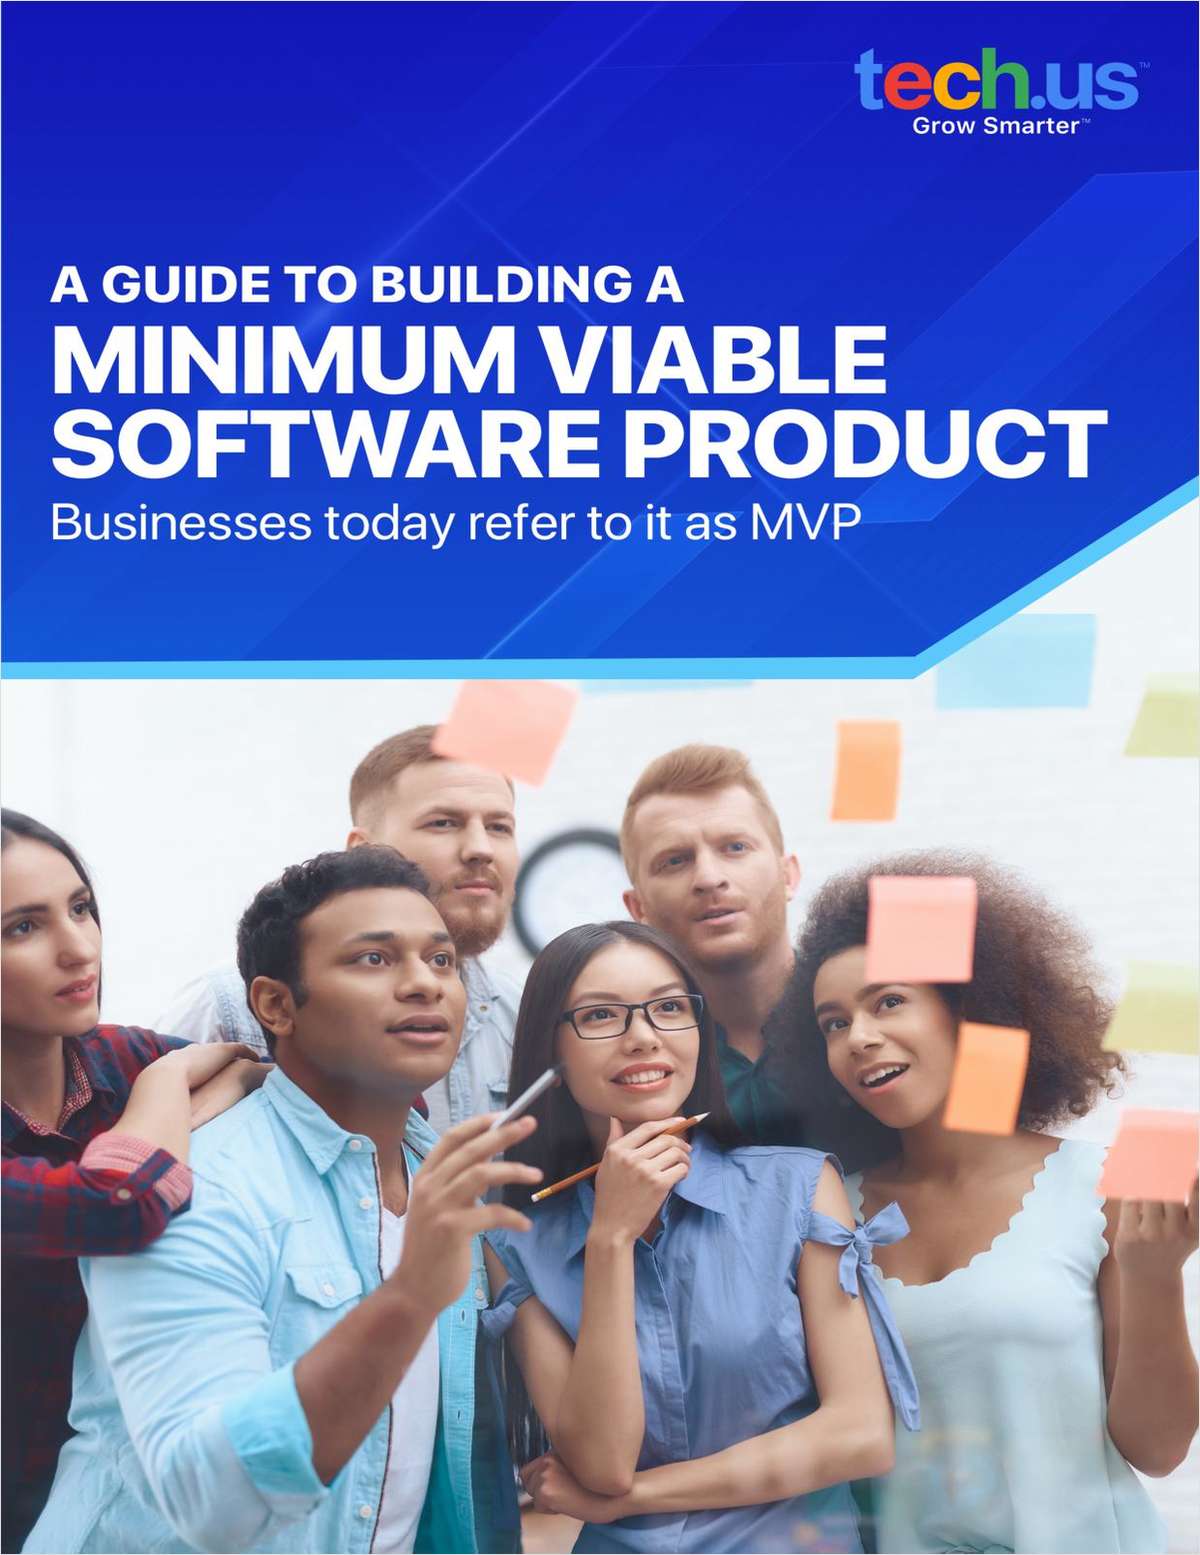 A Guide to Building a Minimum VIable Software Product